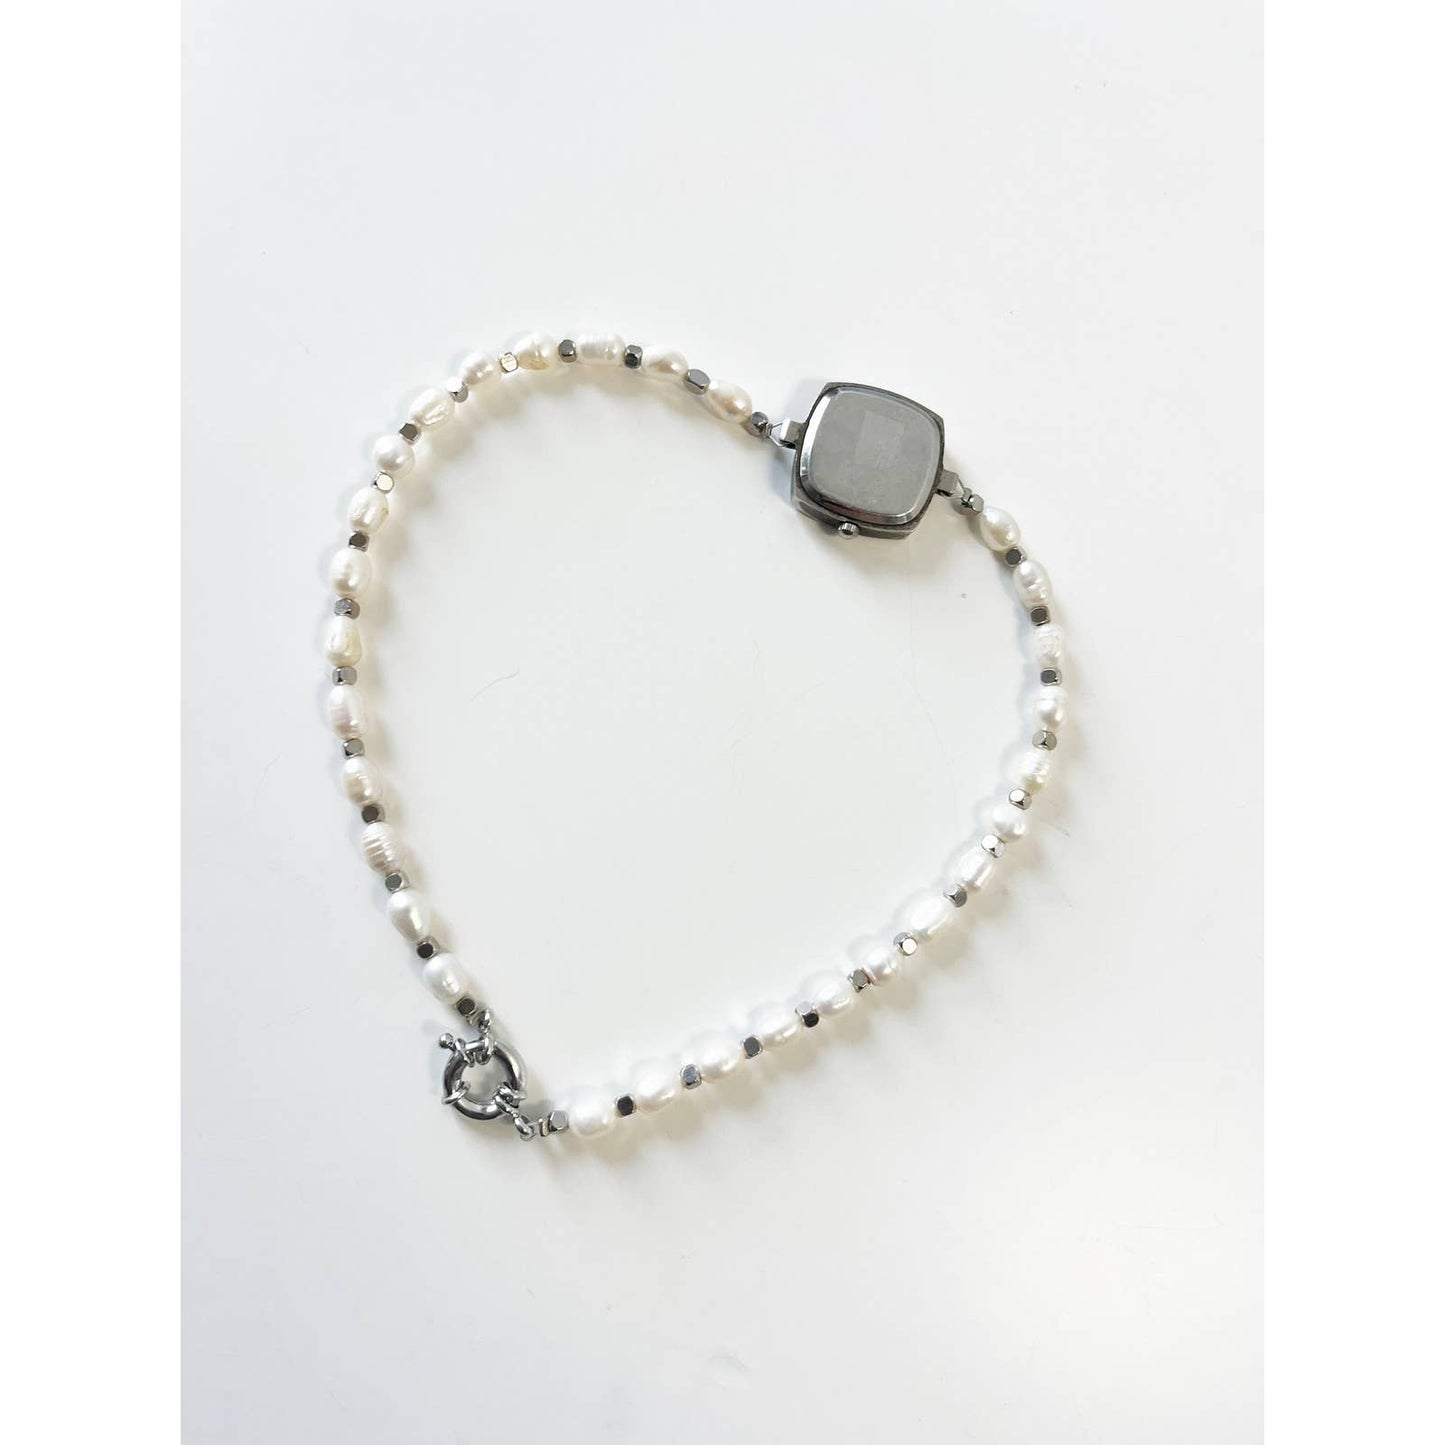 Watch Necklace | Vintage One of a Kind Watch Choker with Pearls Silver Details